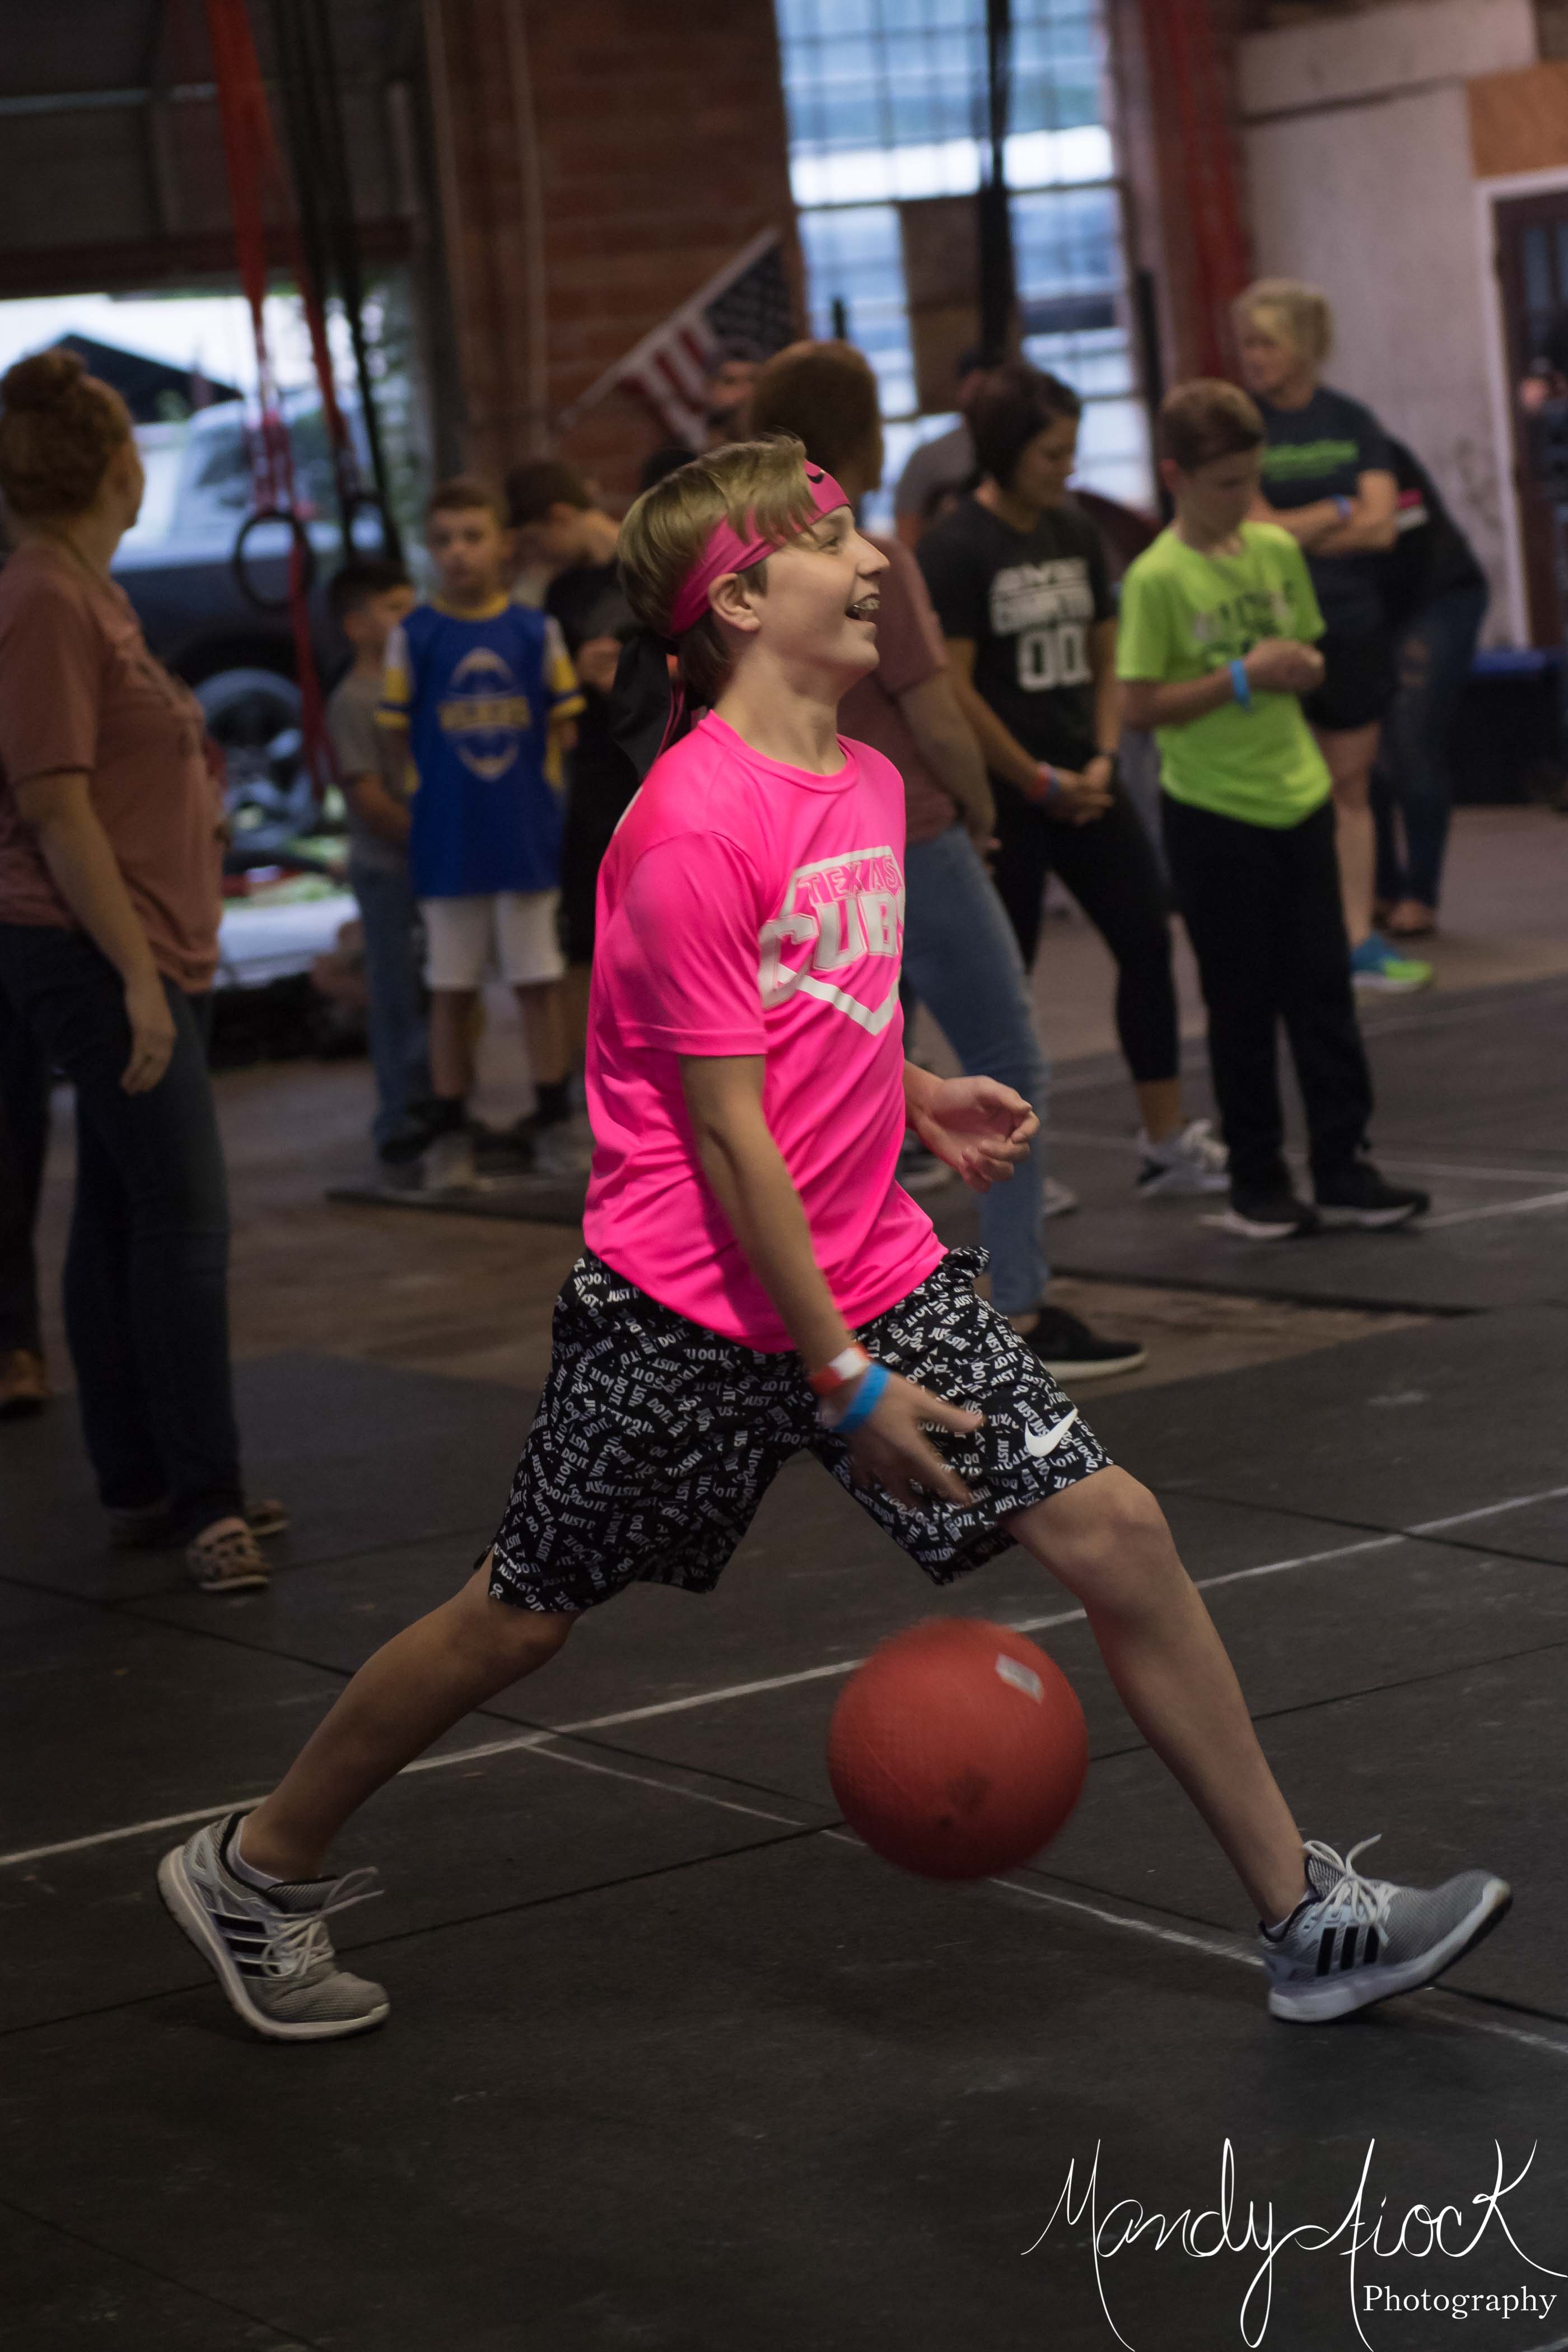 Photos from Mother’s Culture Club’s Annual King of the Square 4 Square Tournament by Mandy Fiock Photography